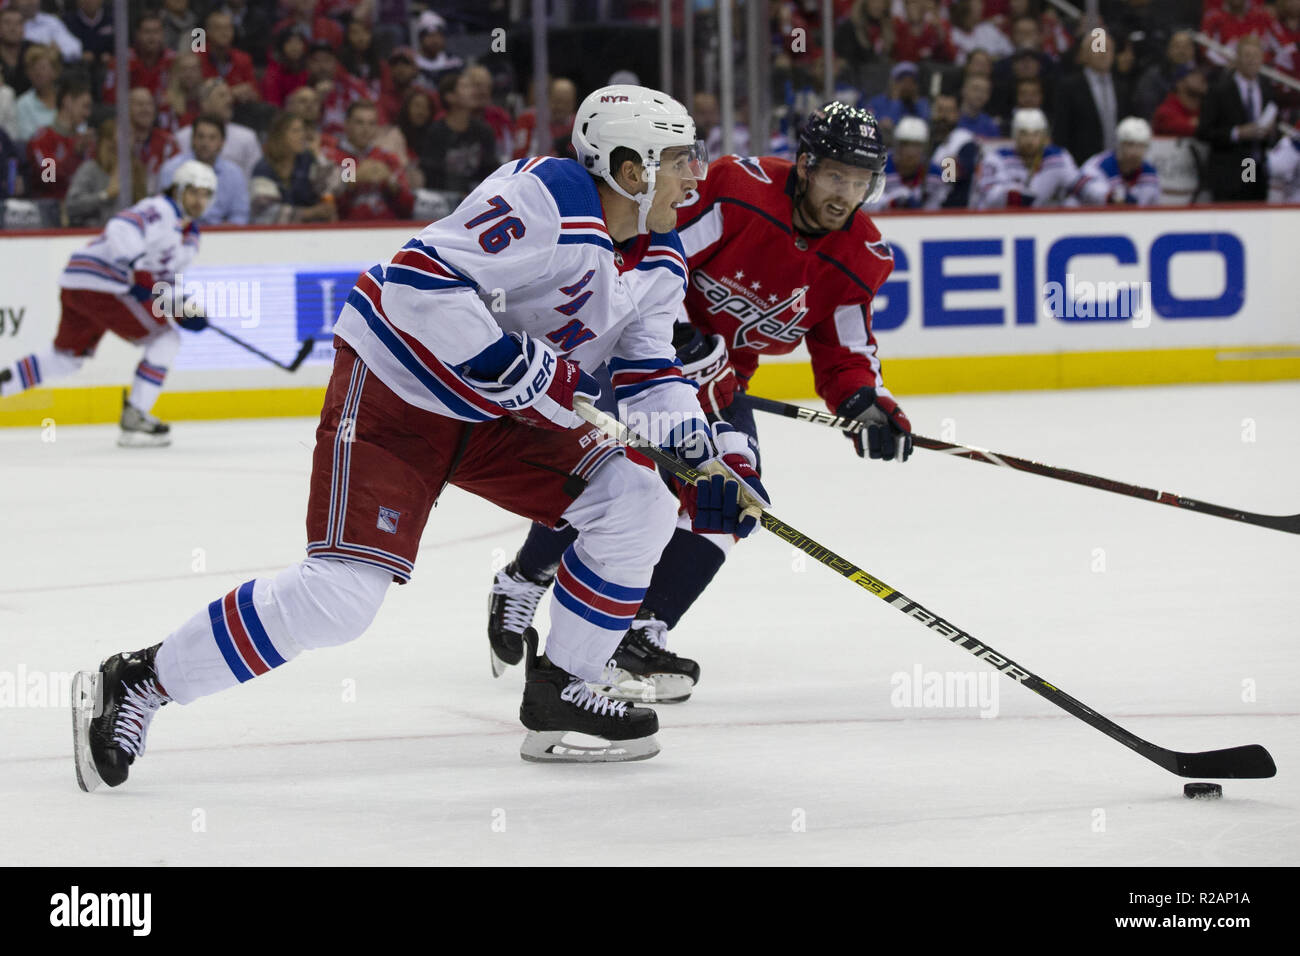 Ron Duguay: Guarding Alex Ovechkin is key for Rangers - Sports